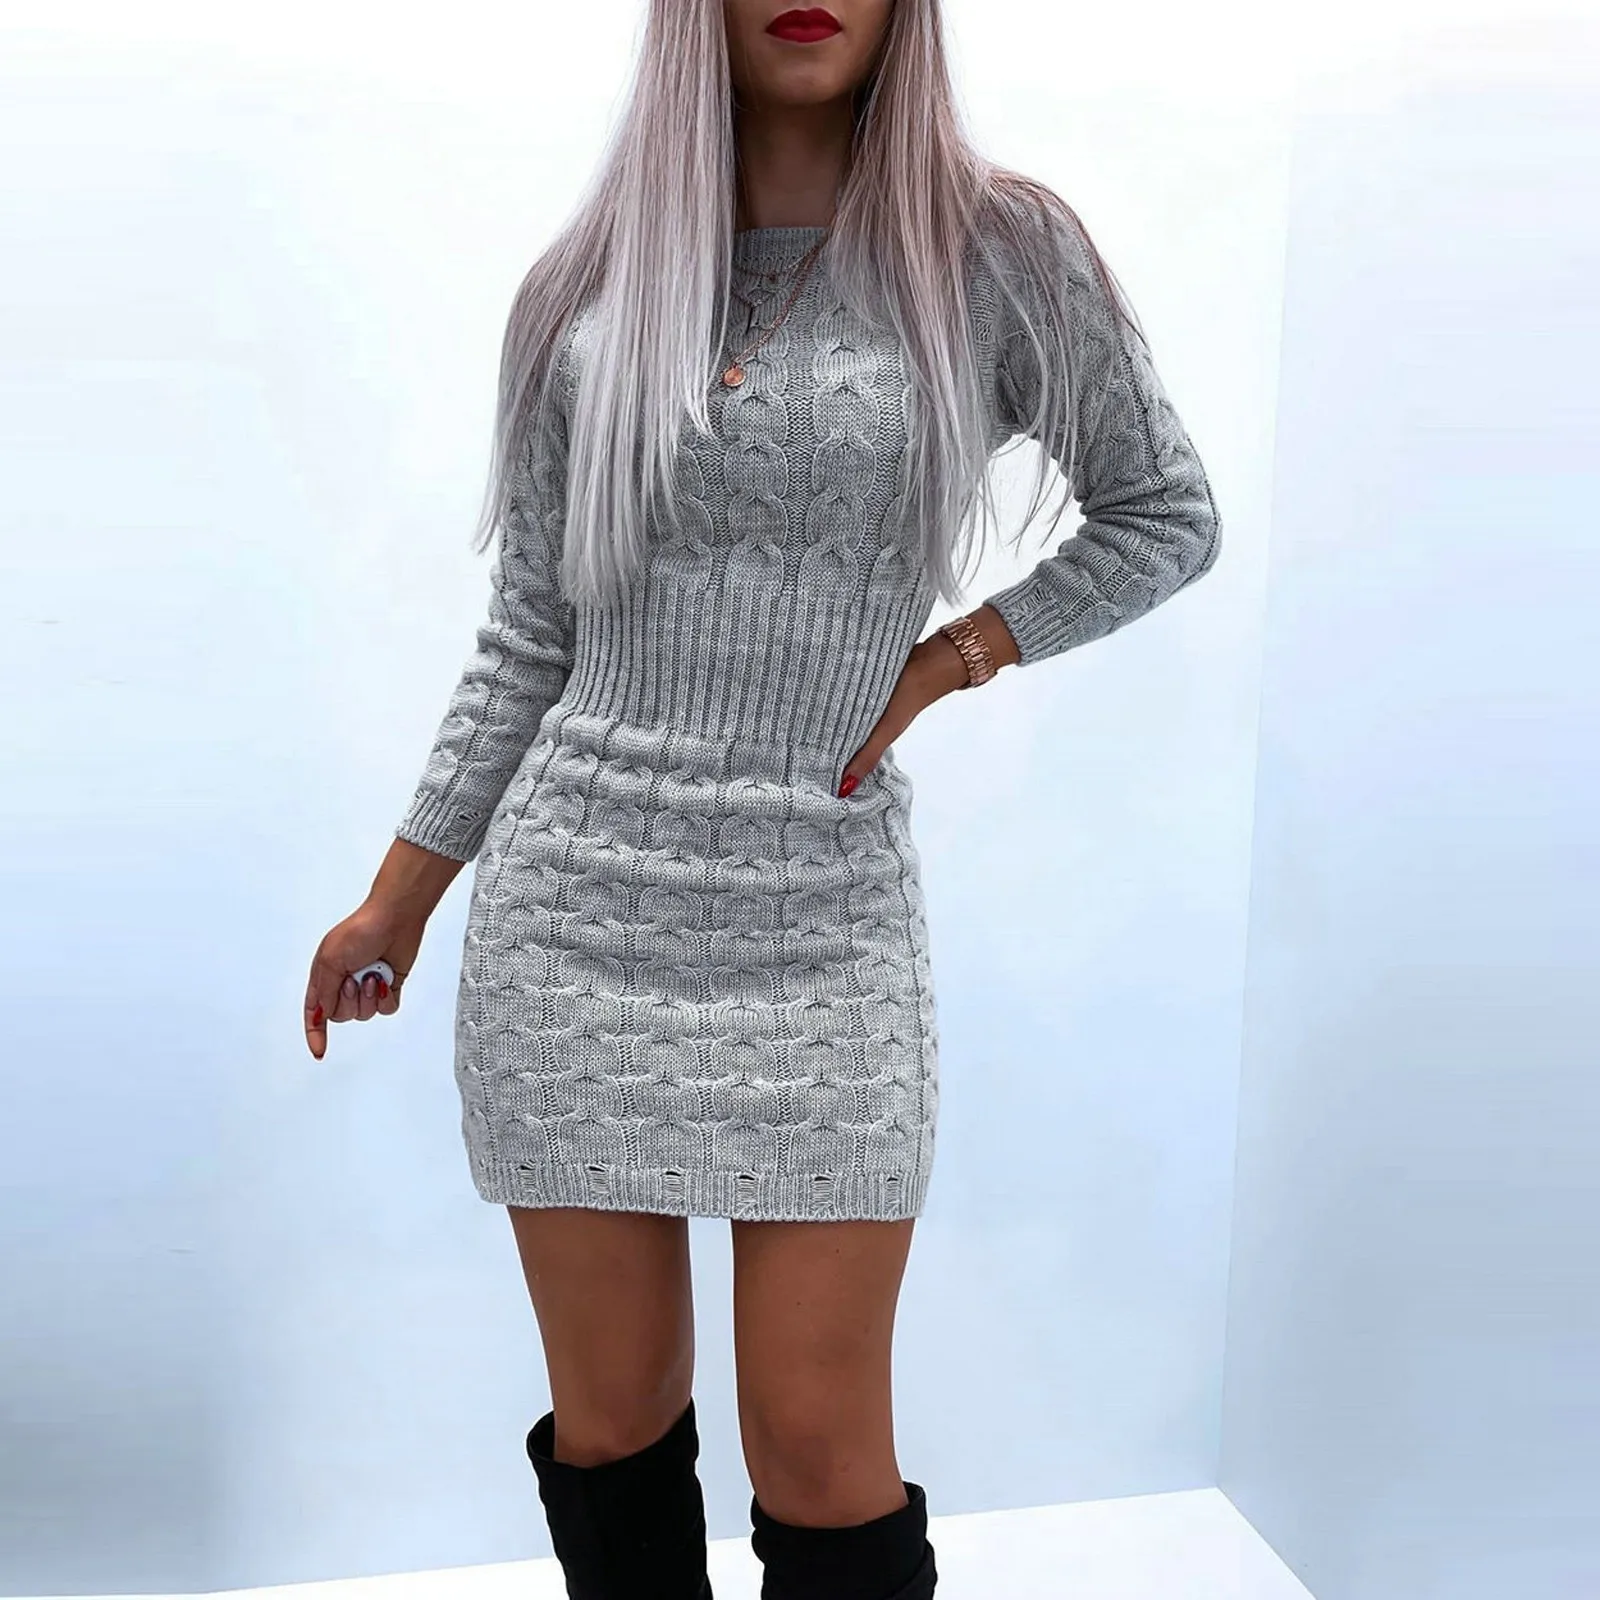 Elegant Solid Color Knitted Mini Dress Women Autumn Winter Long Sleeve Warm Sweater Dress Pullover Ladies Jumper Female Clothes